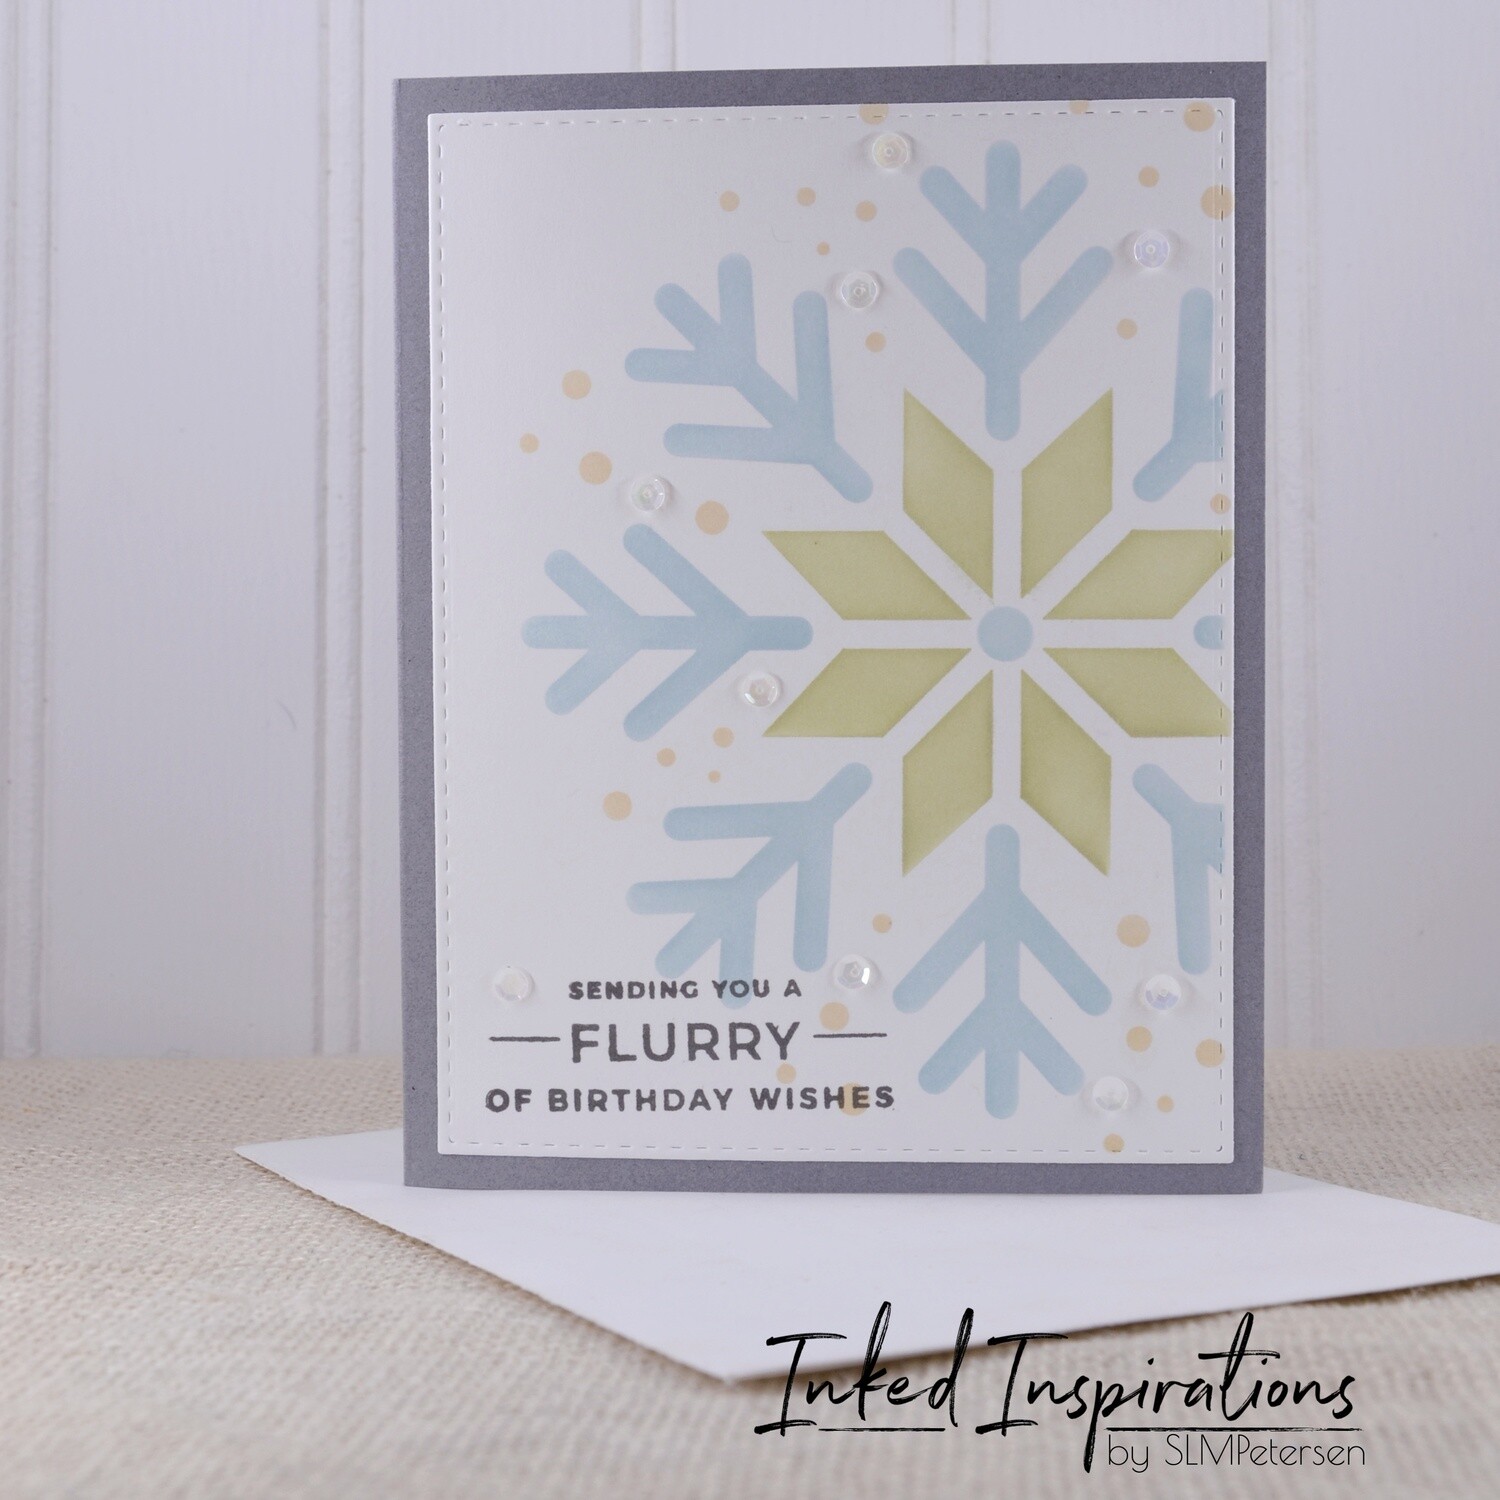 Sending You a Flurry of Birthday Wishes - Large Green & Blue Snowflake